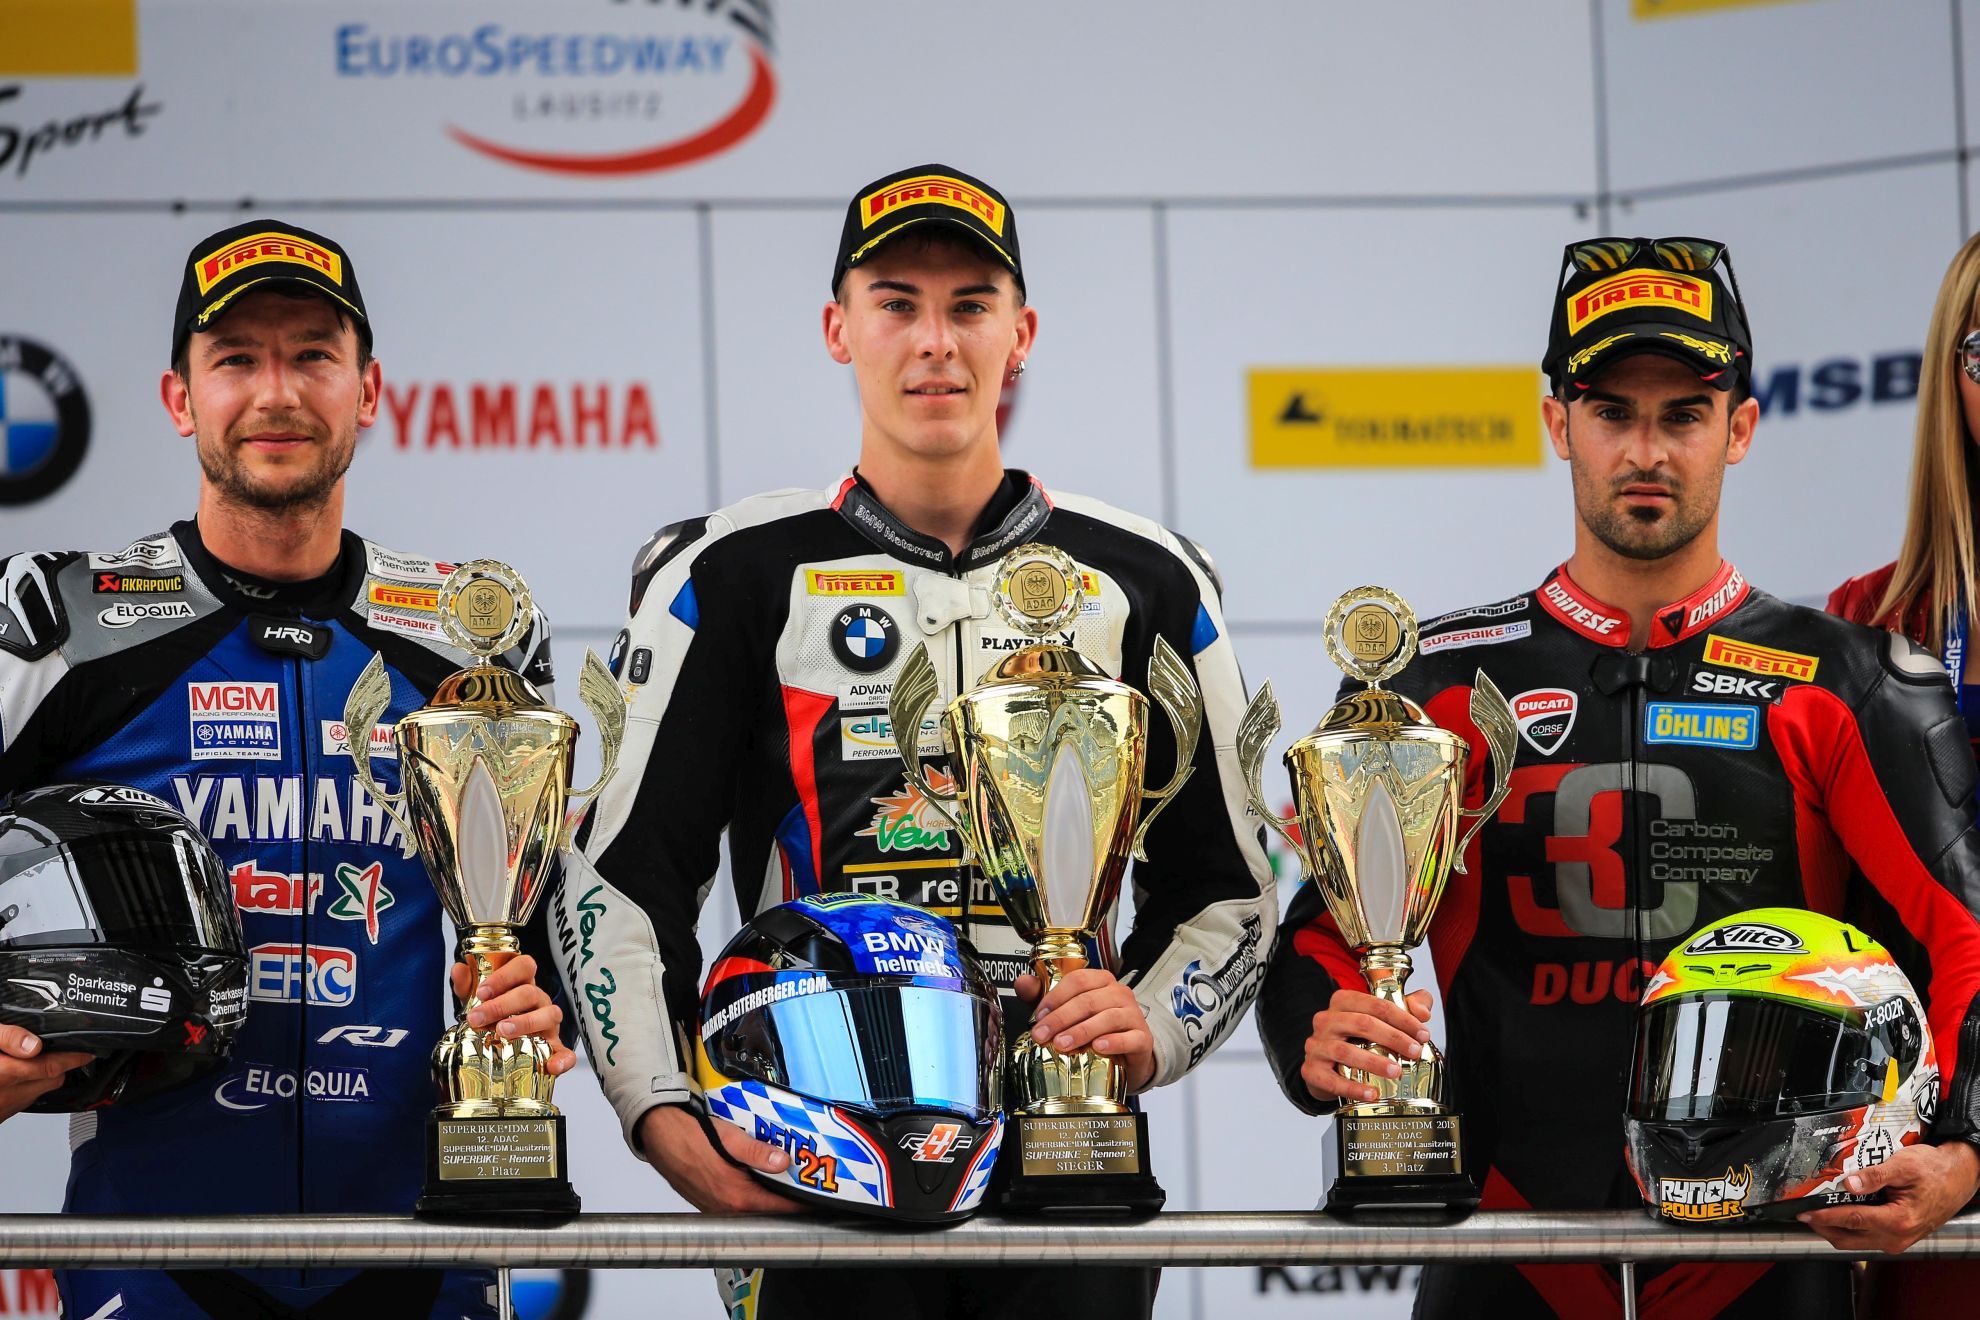 Golden weekend for the BMW S 1000 RR